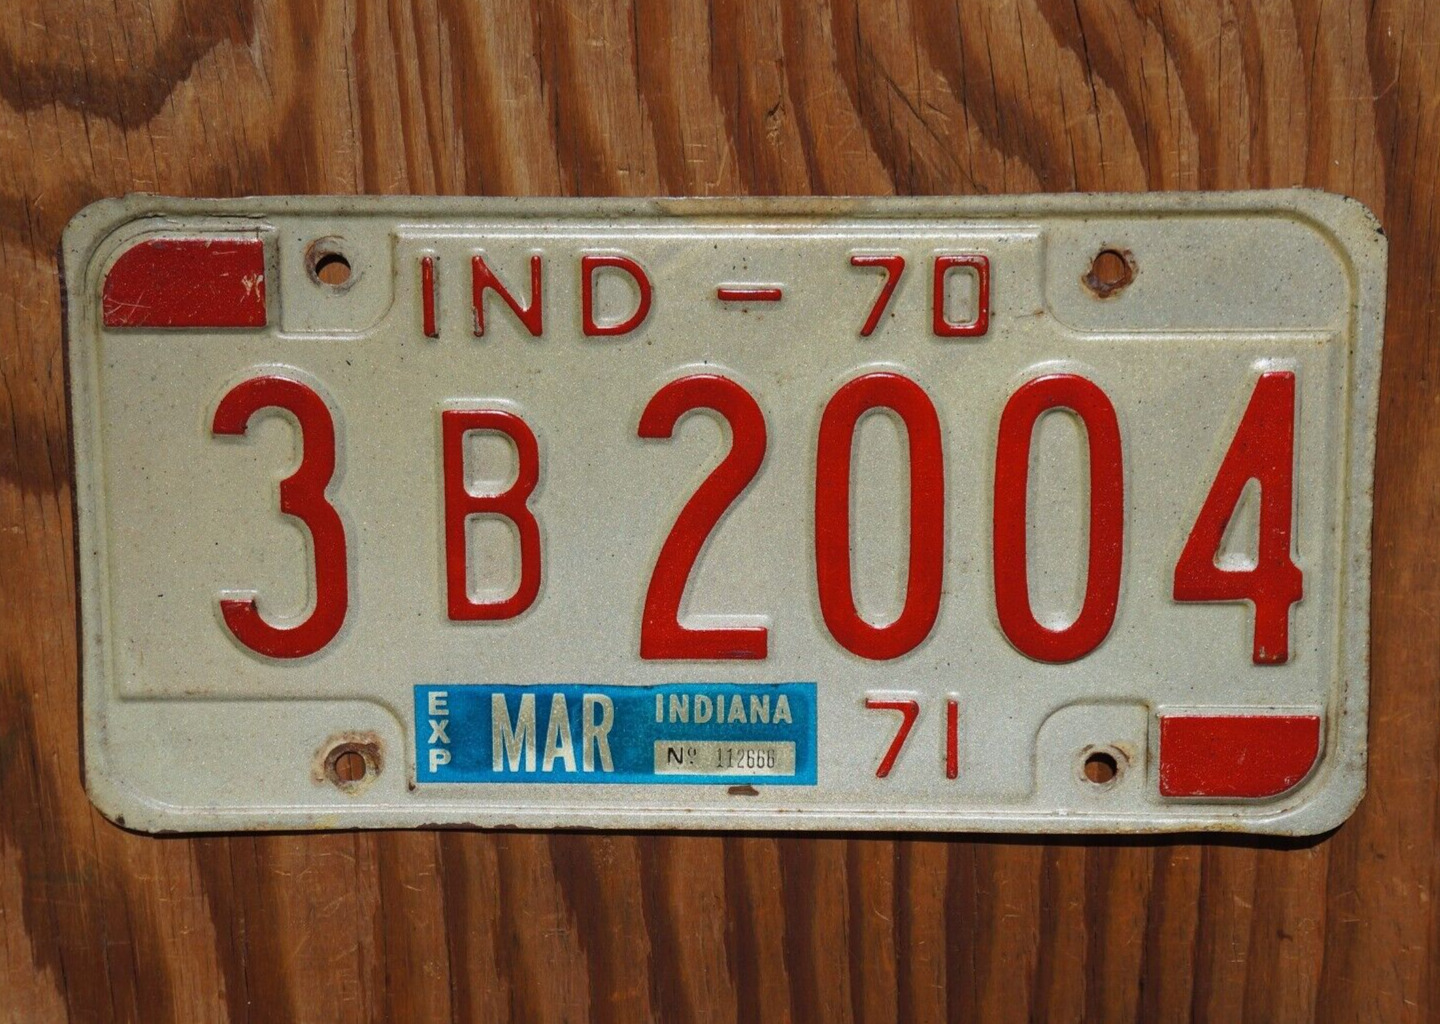 1970 1971 Indiana License Plate # 3 B 2004